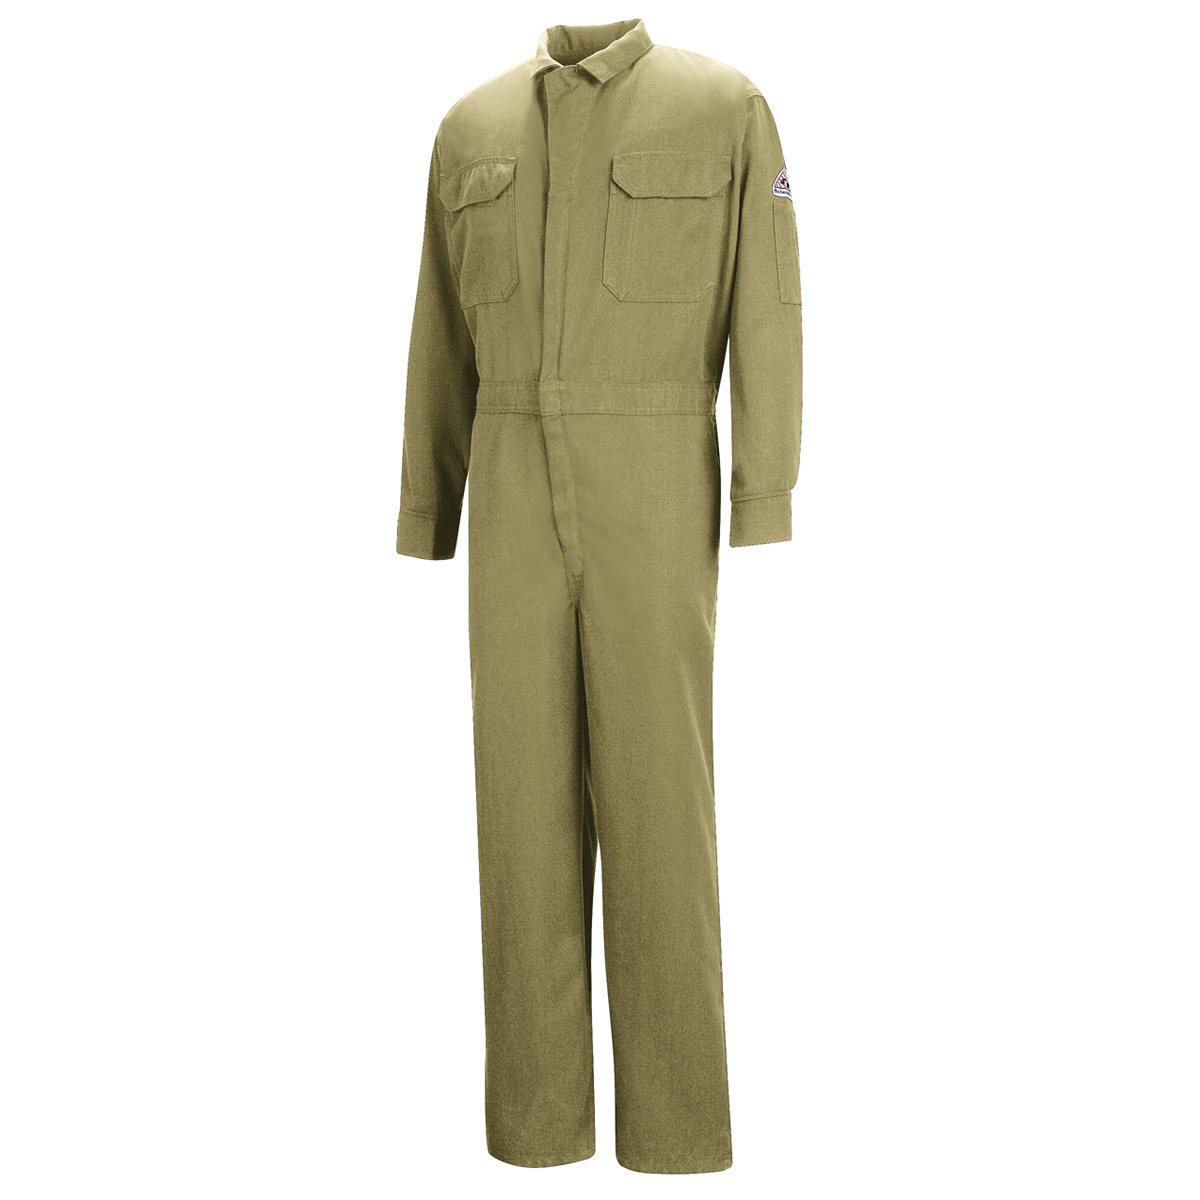 Bulwark® 54 Tall Khaki Modacrylic/Lyocell/Aramid Water Repellent Flame Resistant Coveralls With Zipper Front Closure